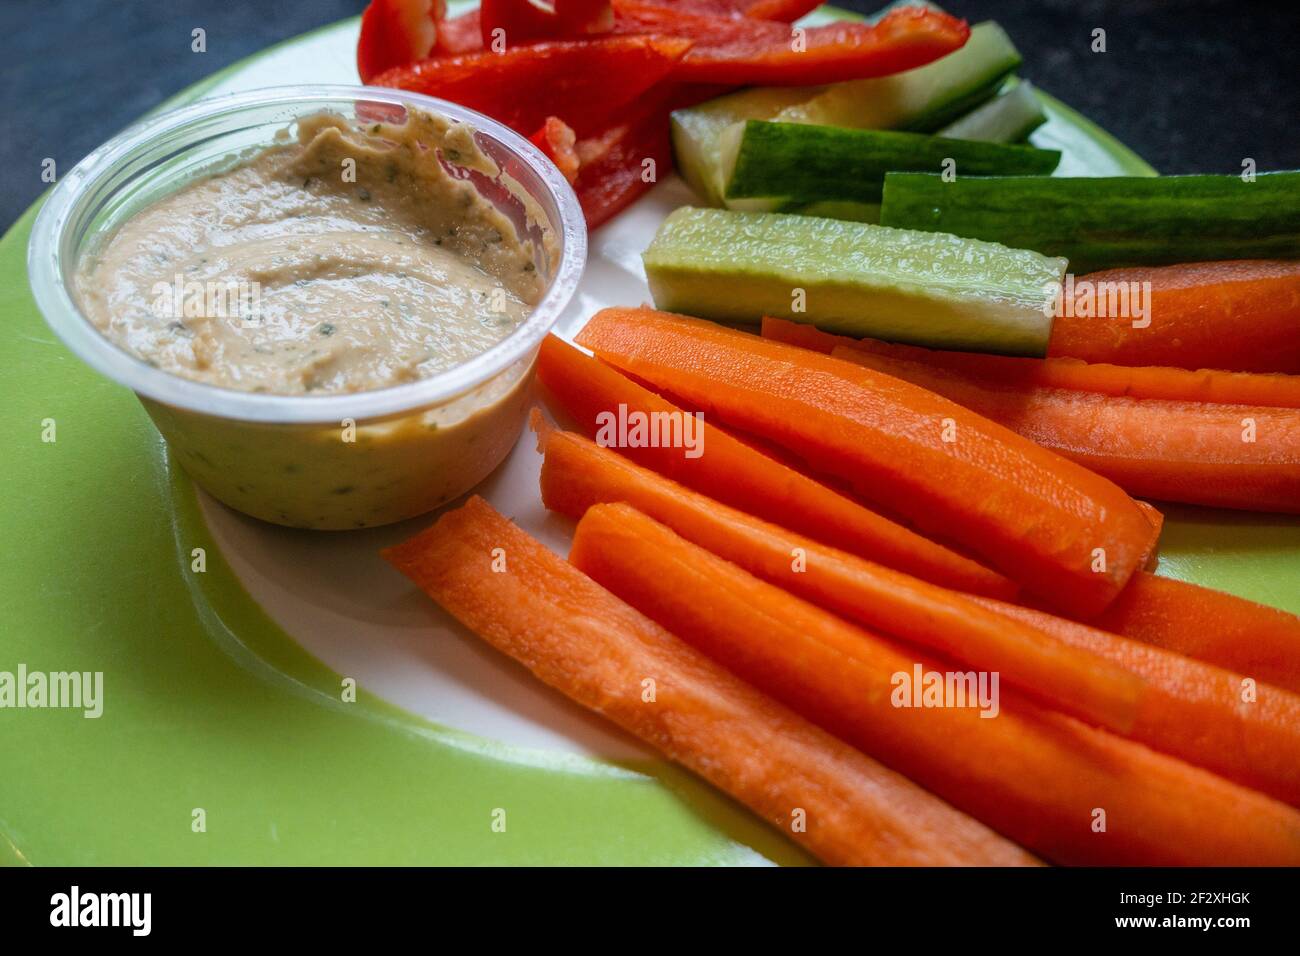 Healthy meal of sliced, raw vegetables with a humus dip Stock Photo